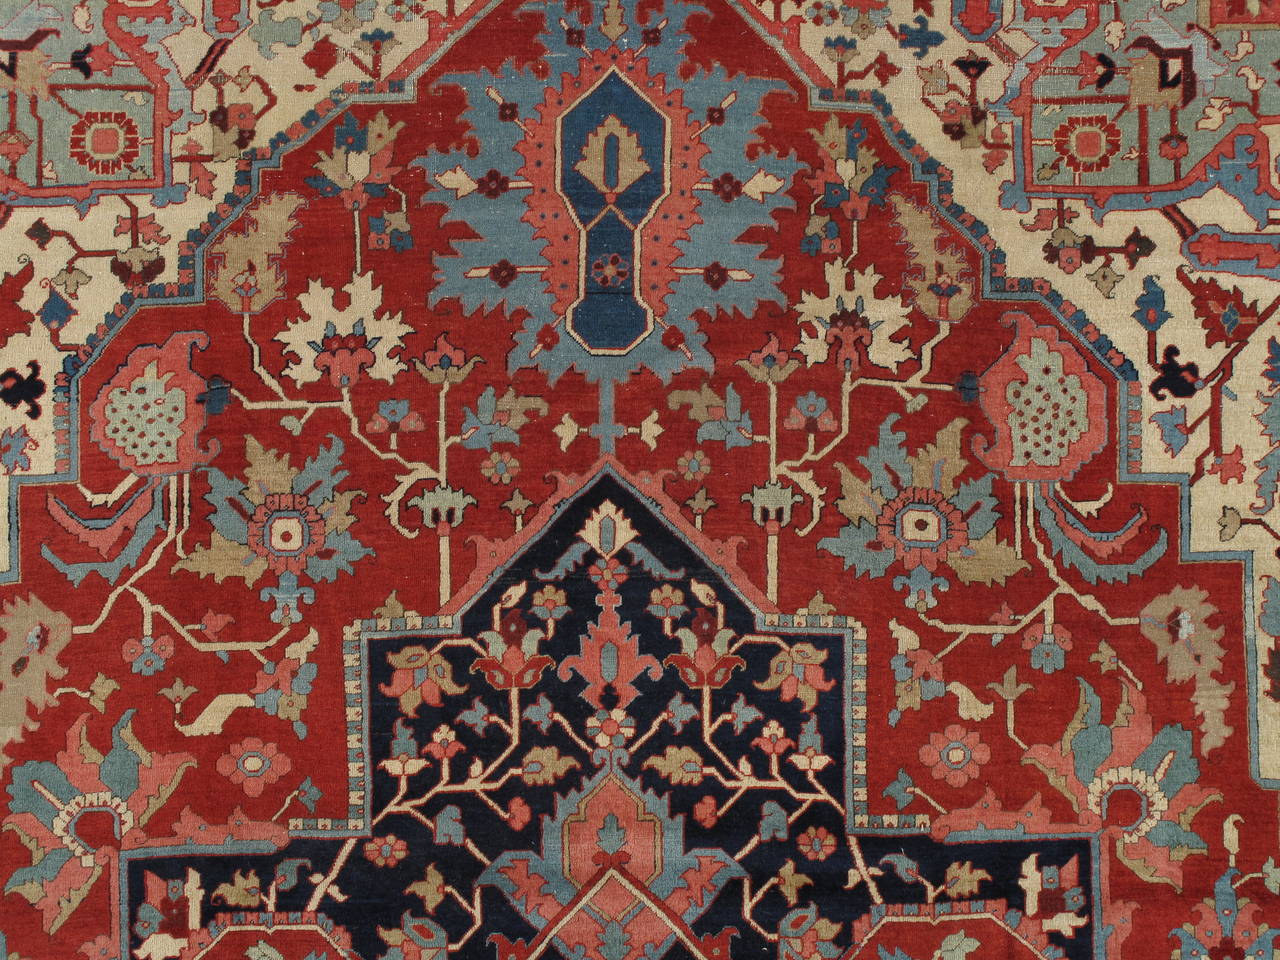 Antique Serapi Carpets are one of the most sought after rugs particularly in America and England for many years. Antique Serapi rugs are a major draw particularly in big city America. Serapi carpets were woven on the level of small workshop with